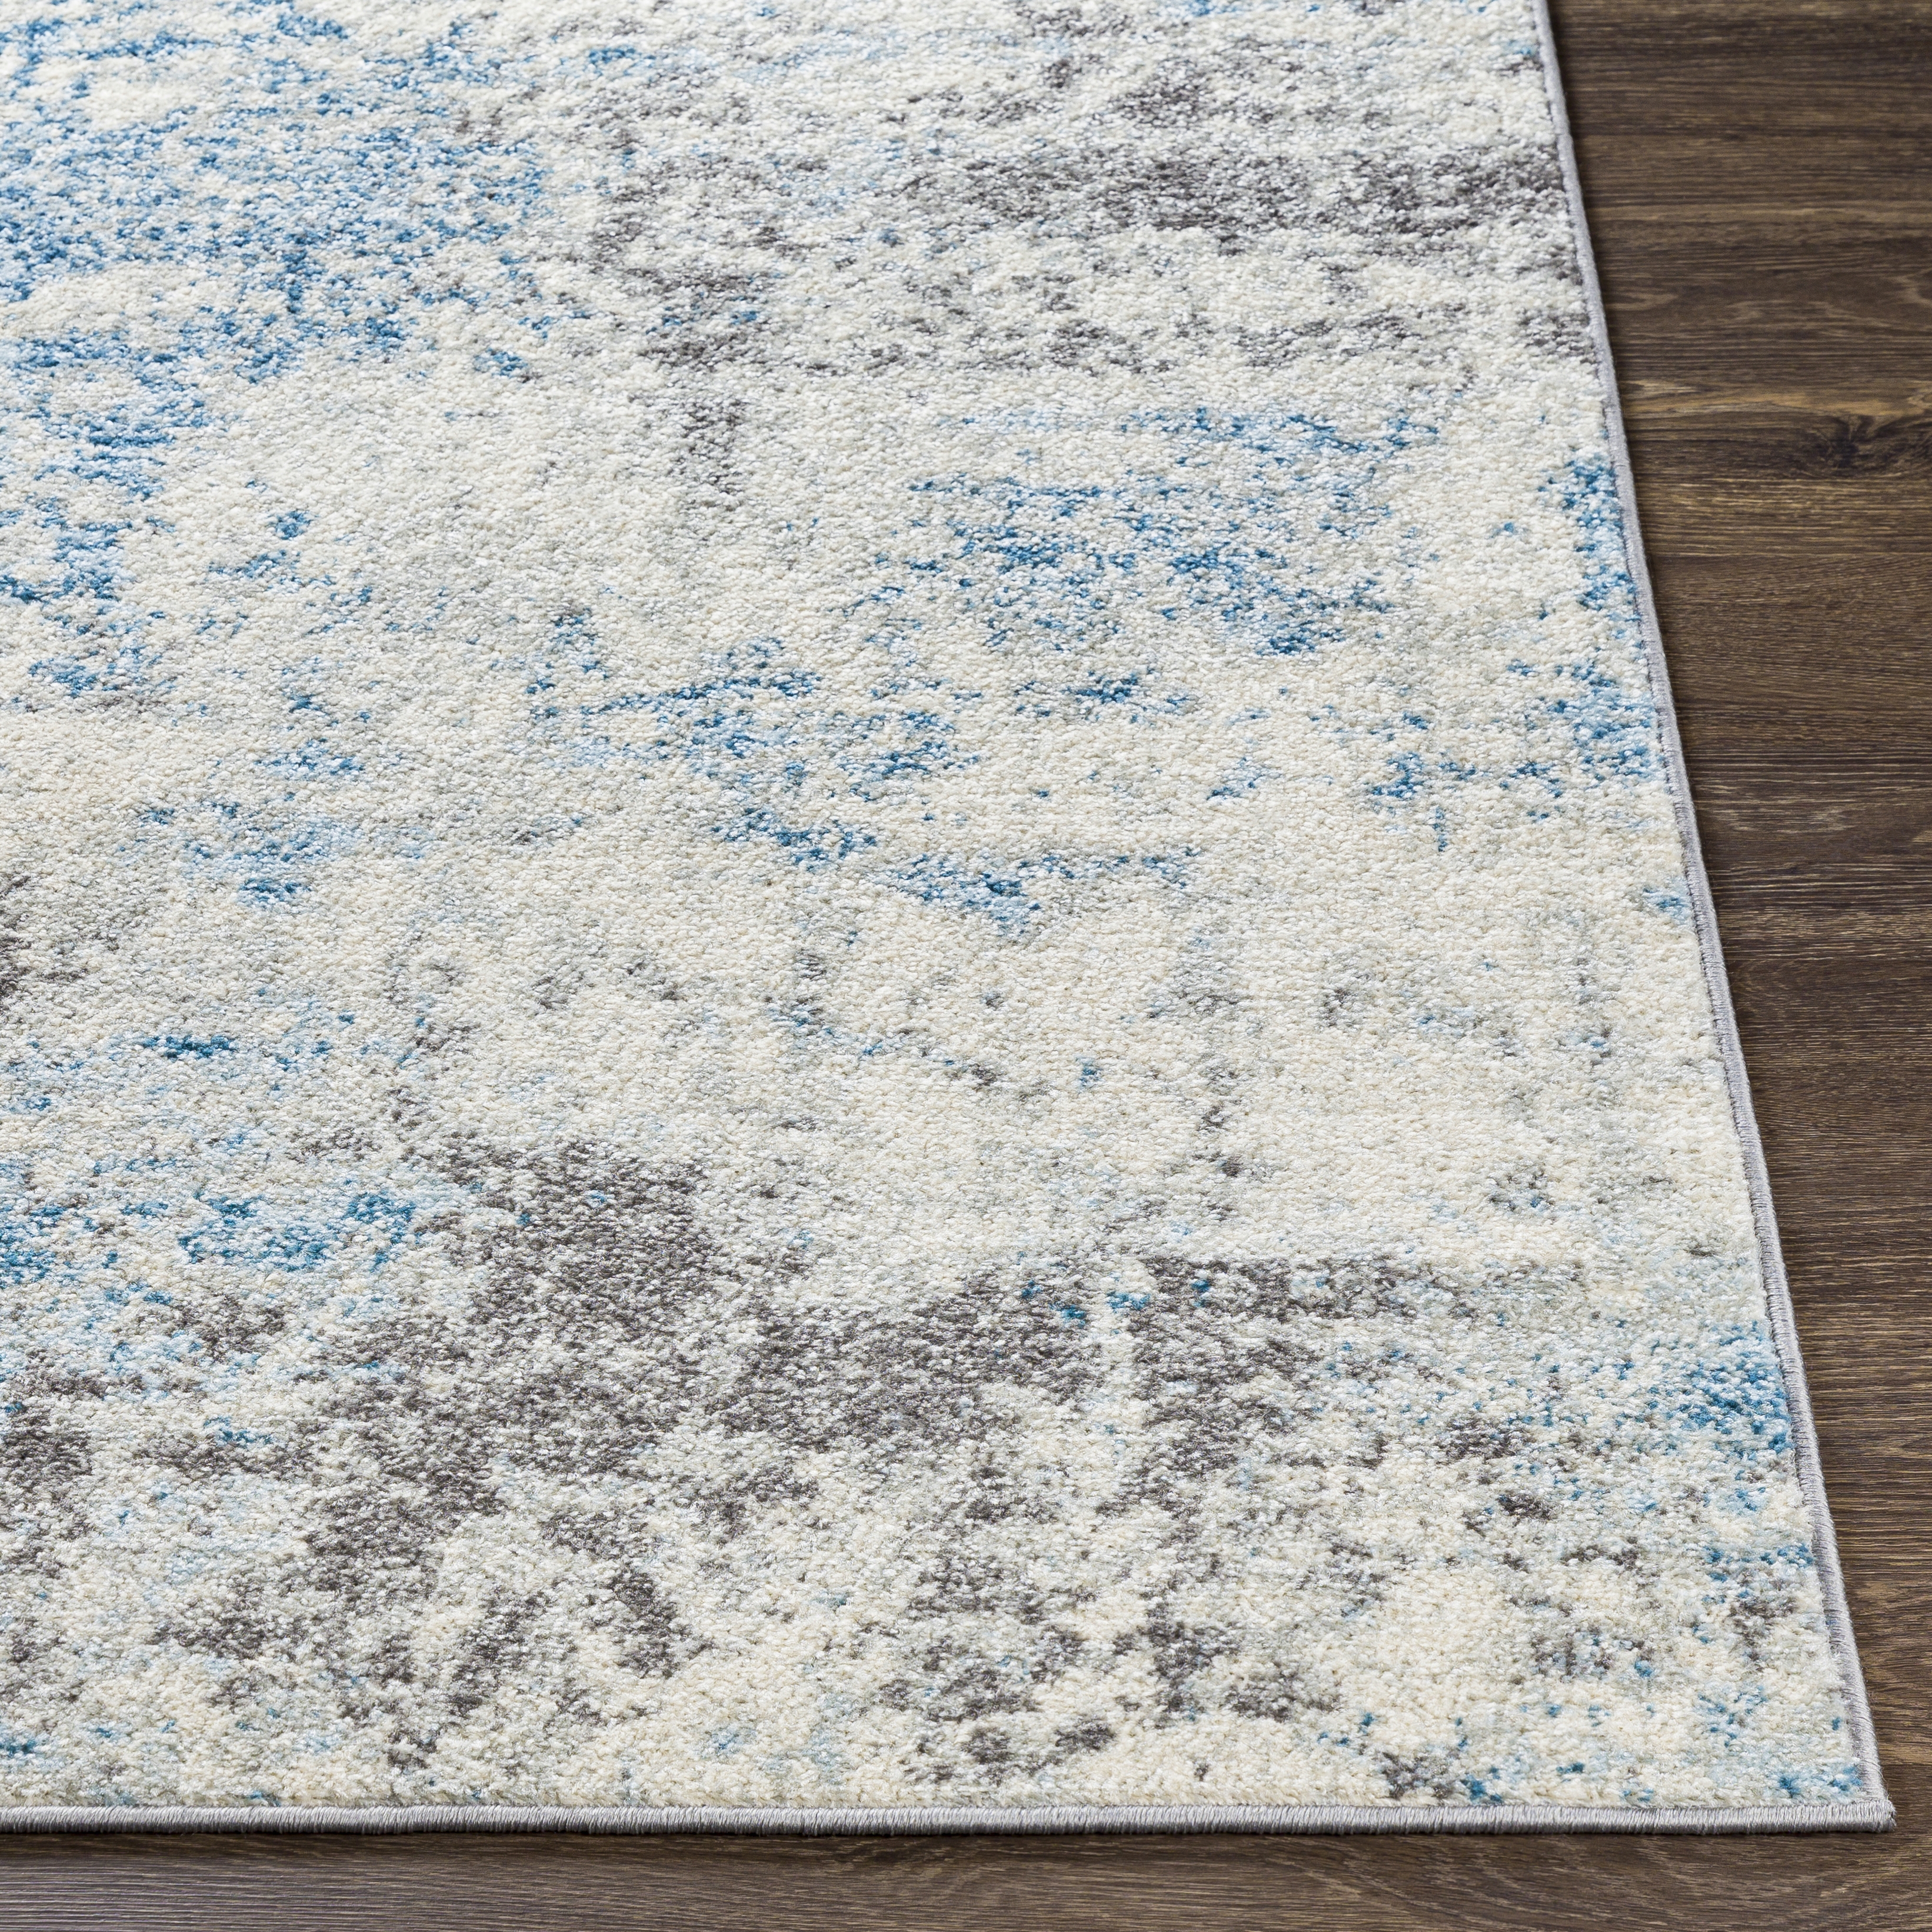 Chester Rug, 5'3" x 7'3" - Image 2